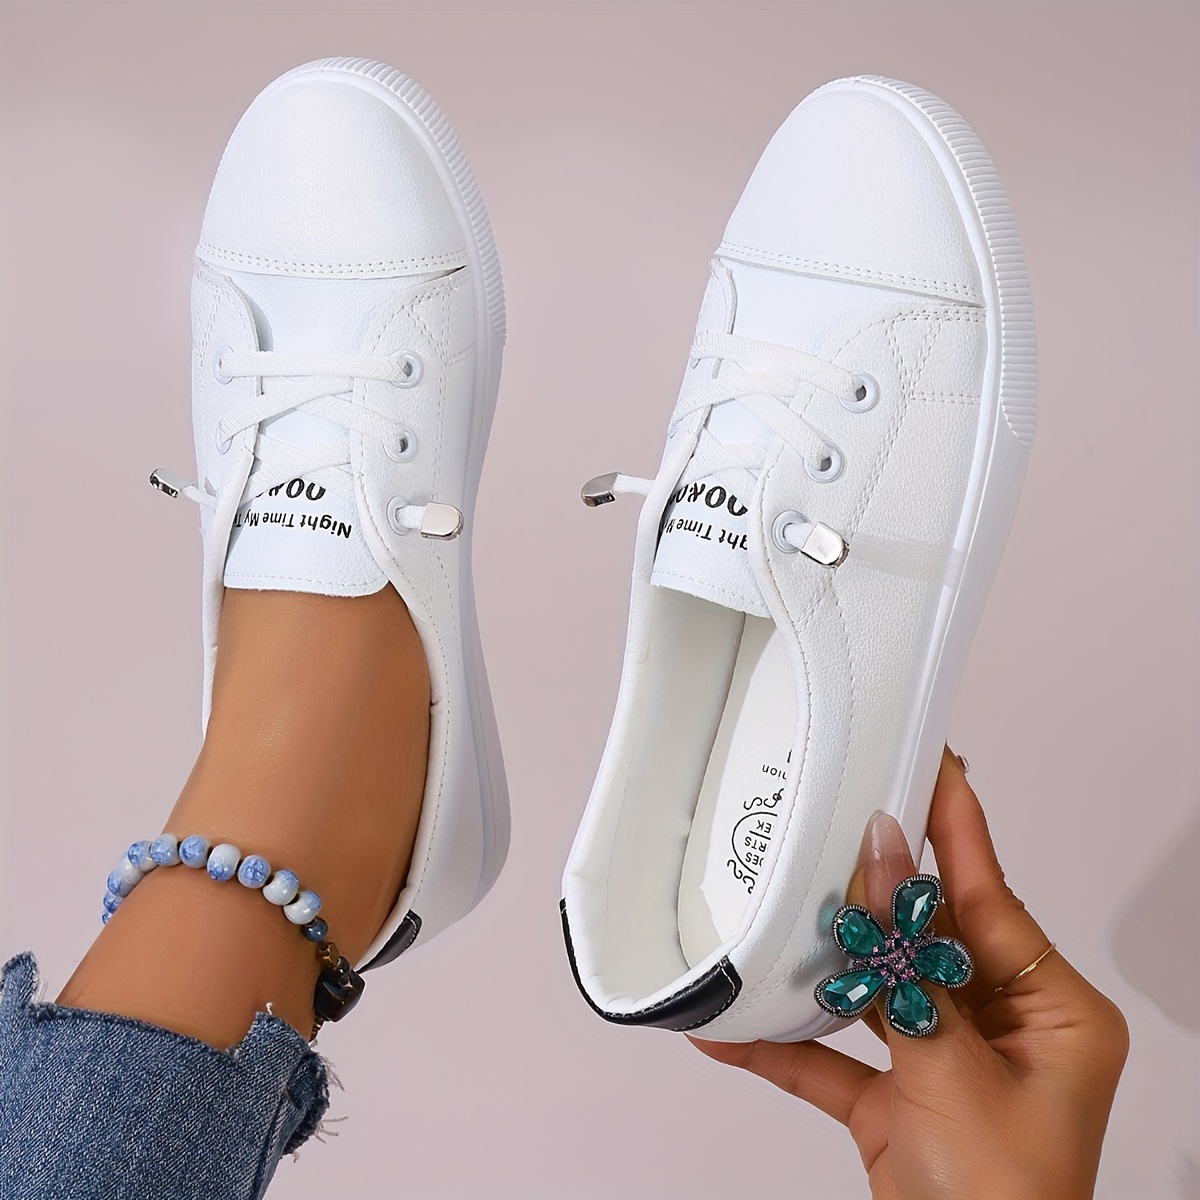 

Women's Fashion Sneakers, Casual Slip-on White Shoes, Low Tops Comfortable Flats For Everyday Wear